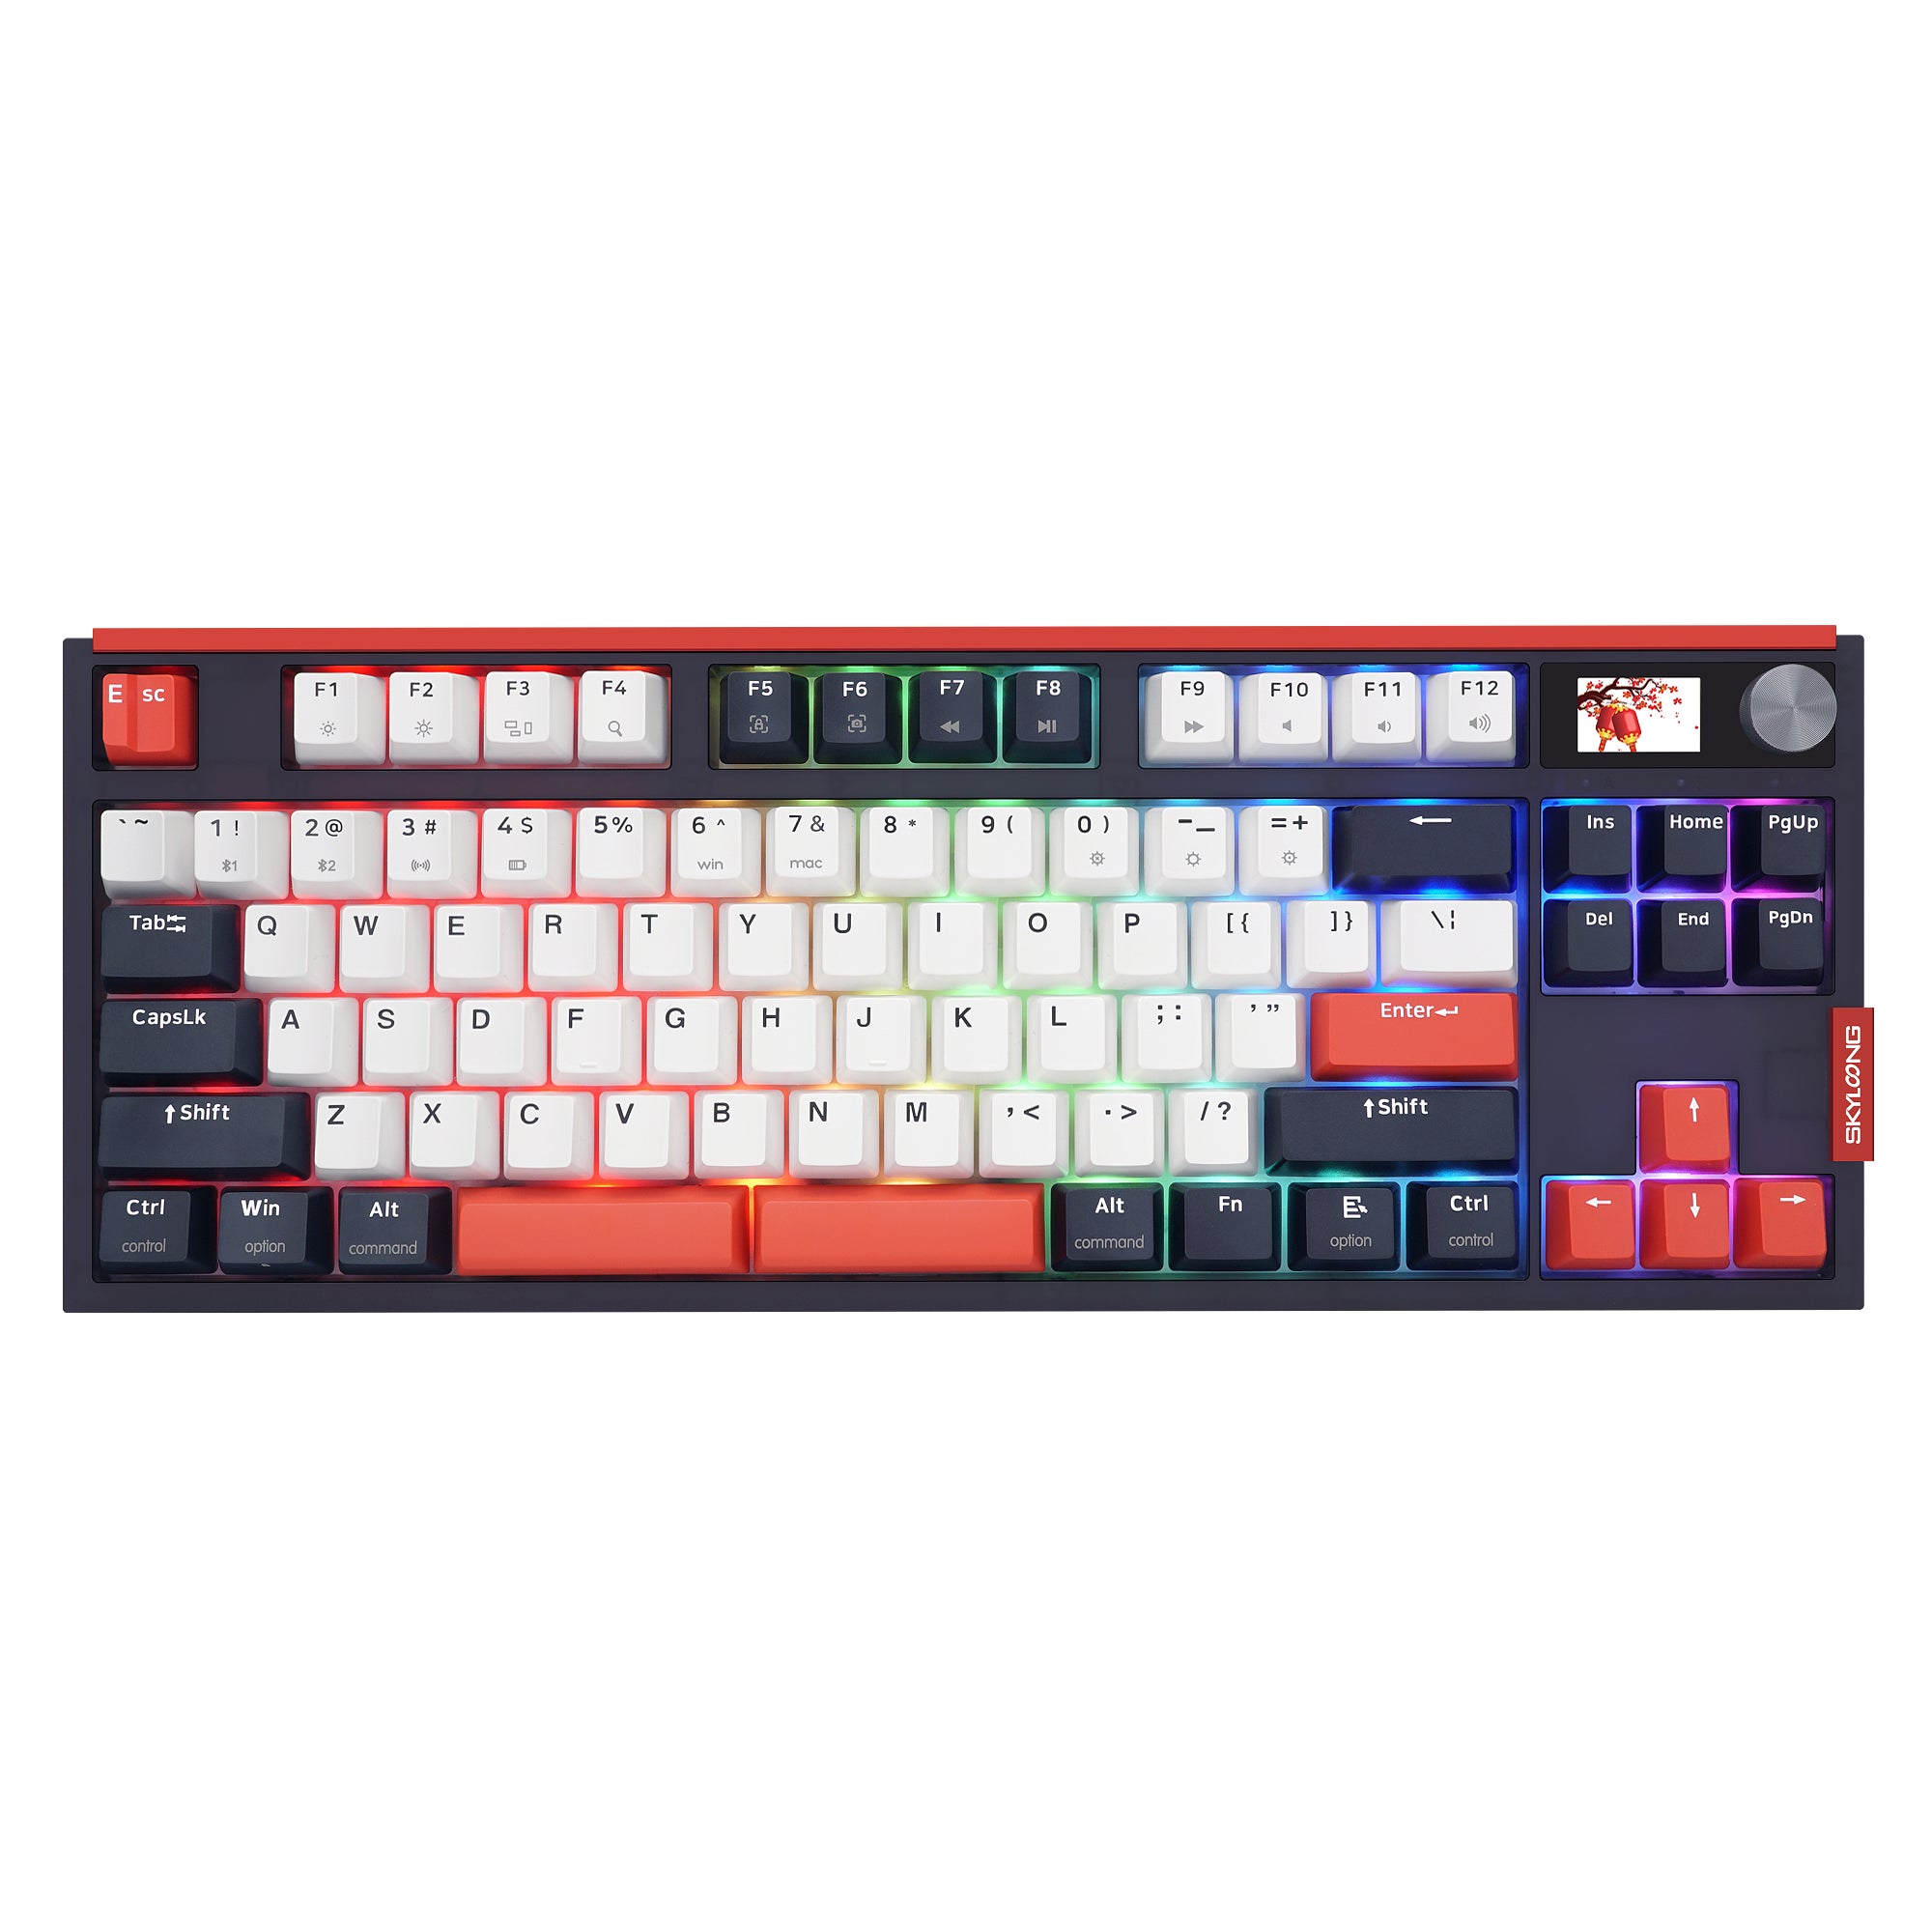 Glacier Skyloong GK87 Pro Youth Wireless/Wired Mechanical Keyboard-Black Red White-